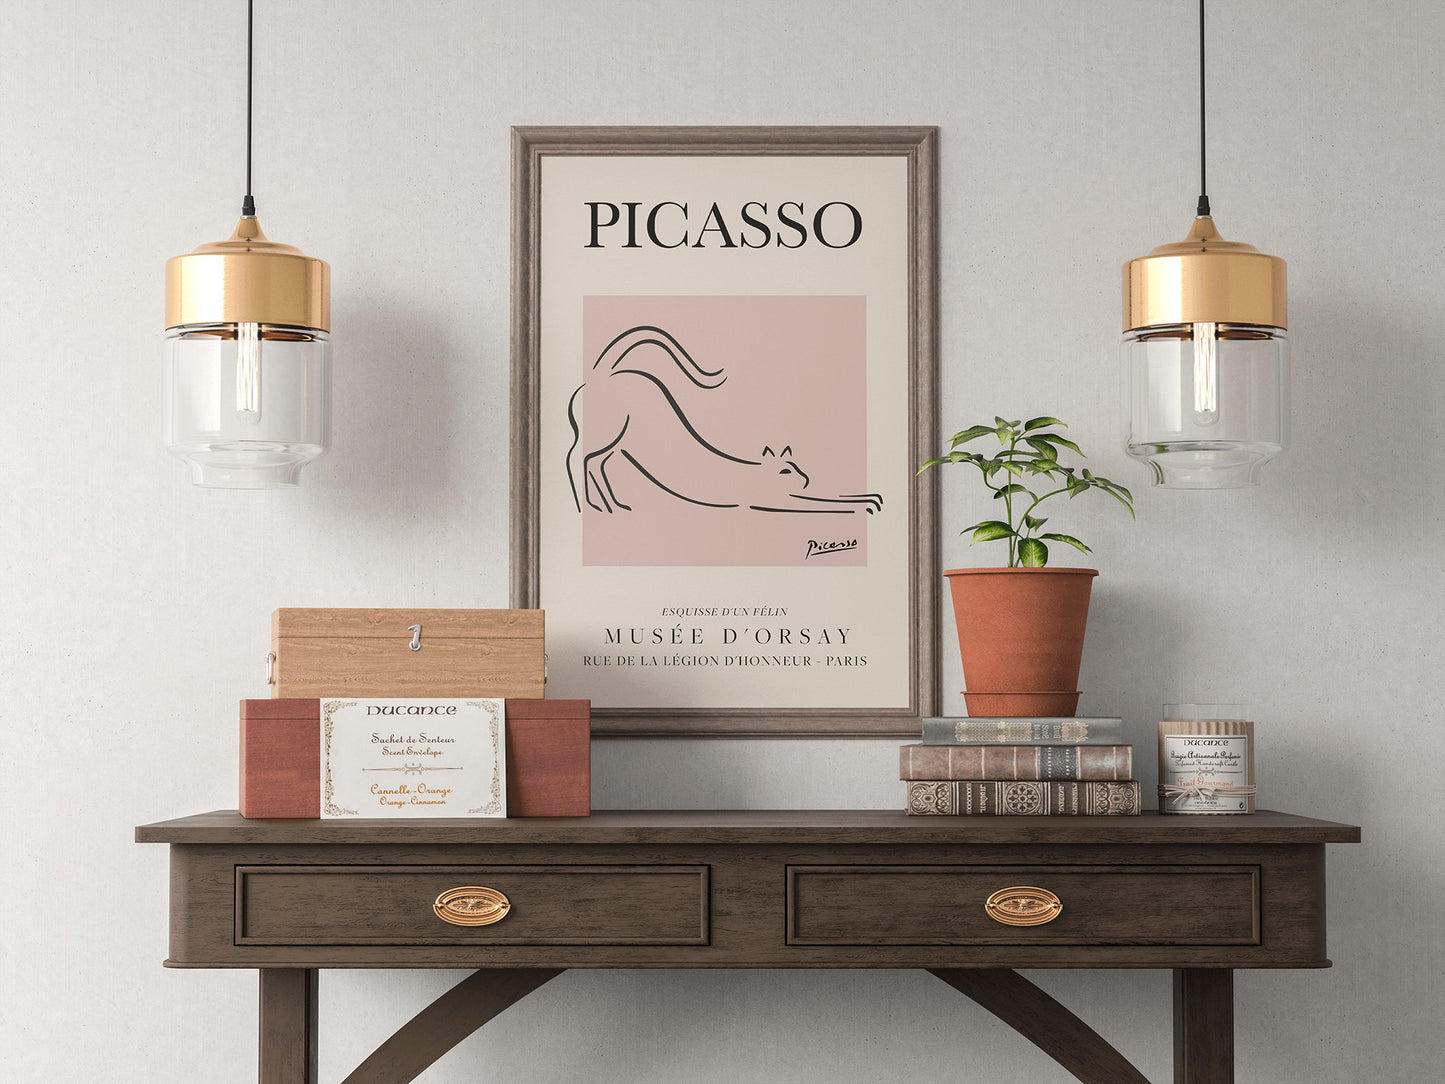 Picasso - The Cat, Exhibition Vintage Line Art Poster, Minimalist Line Drawing, Ideal Home Decor or Gift Print